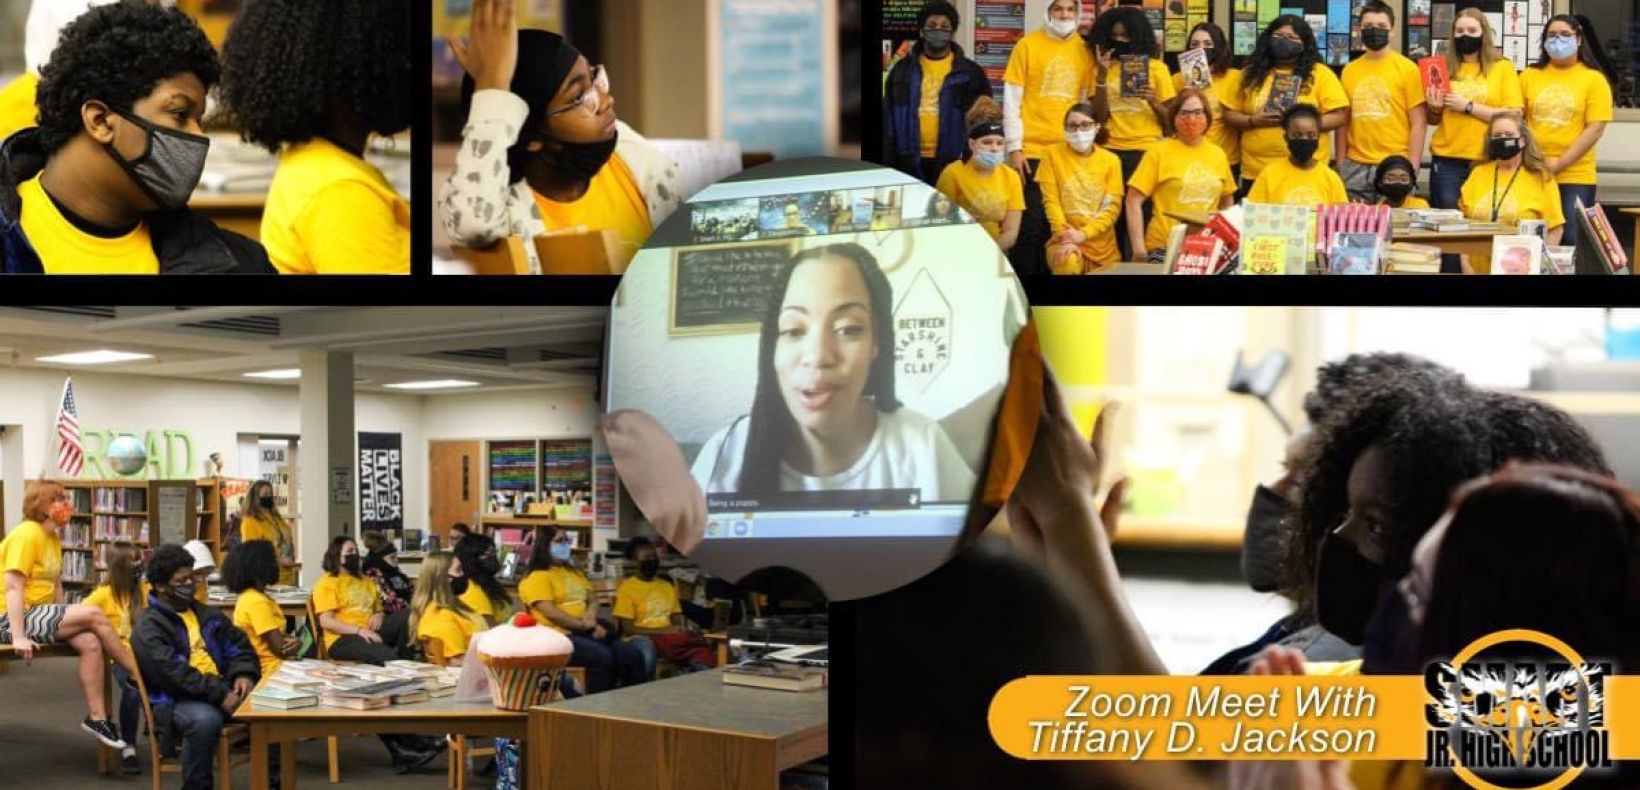 Multiple images of students meeting an author via a video call.